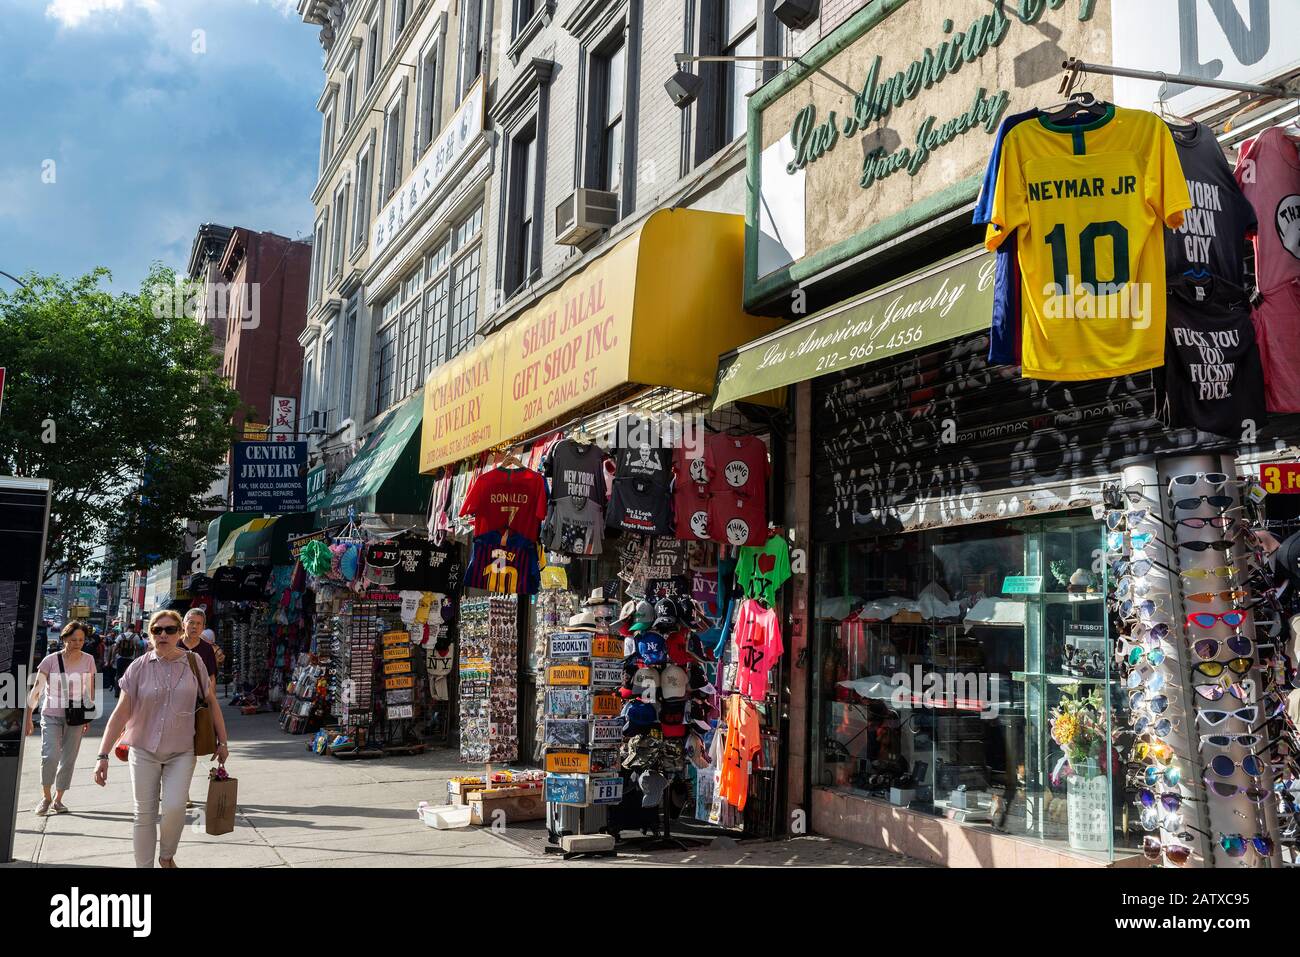 New York City, USA - August 2, 2018: Street with many shops and people around in Chinatown, Manhattan, New York City, USA Stock Photo